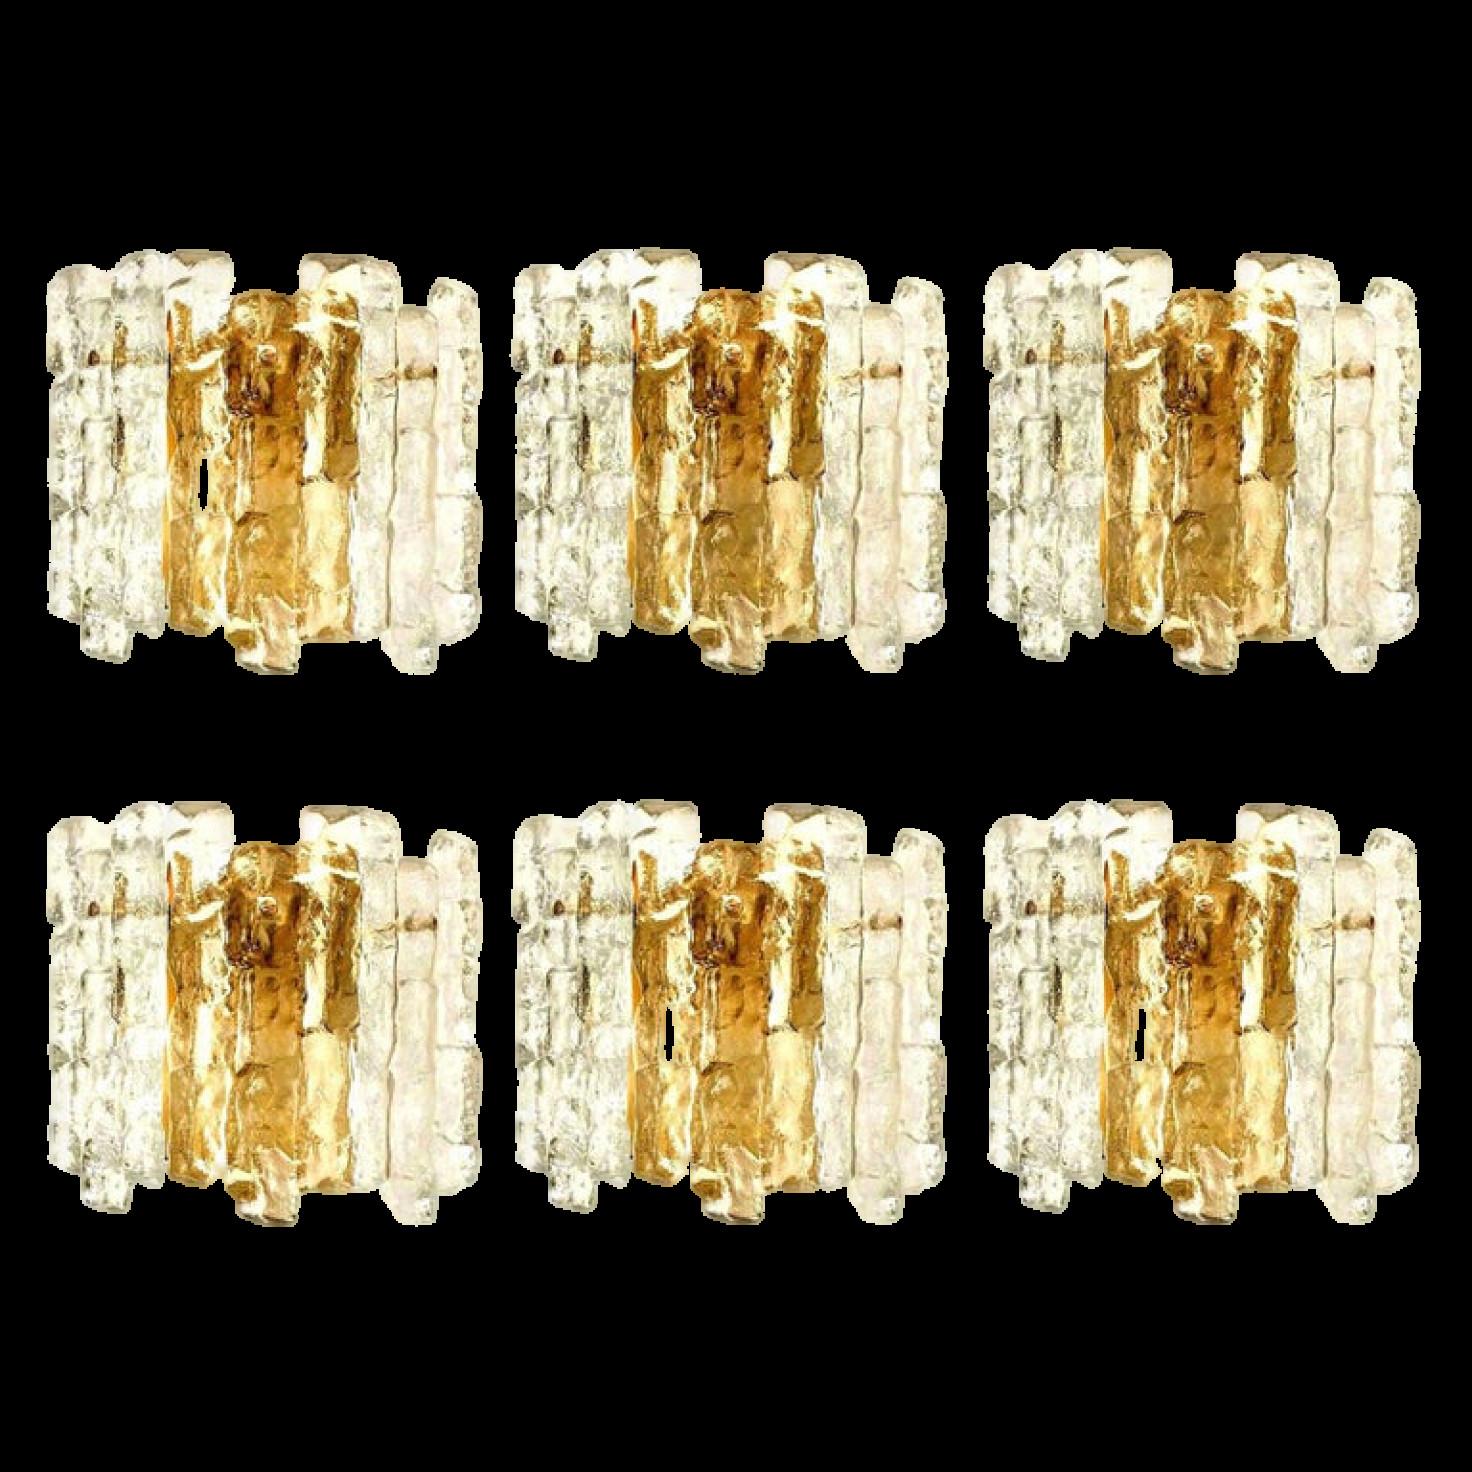 Set of 6 beautiful and elegant modern brass toned wall lights or sconces, manufactured by J.T. Kalmar Austria in the 1970s. Lovely design, executed to a very high standard.

Please notice the price is for 1 item. Several available.

Each wall light